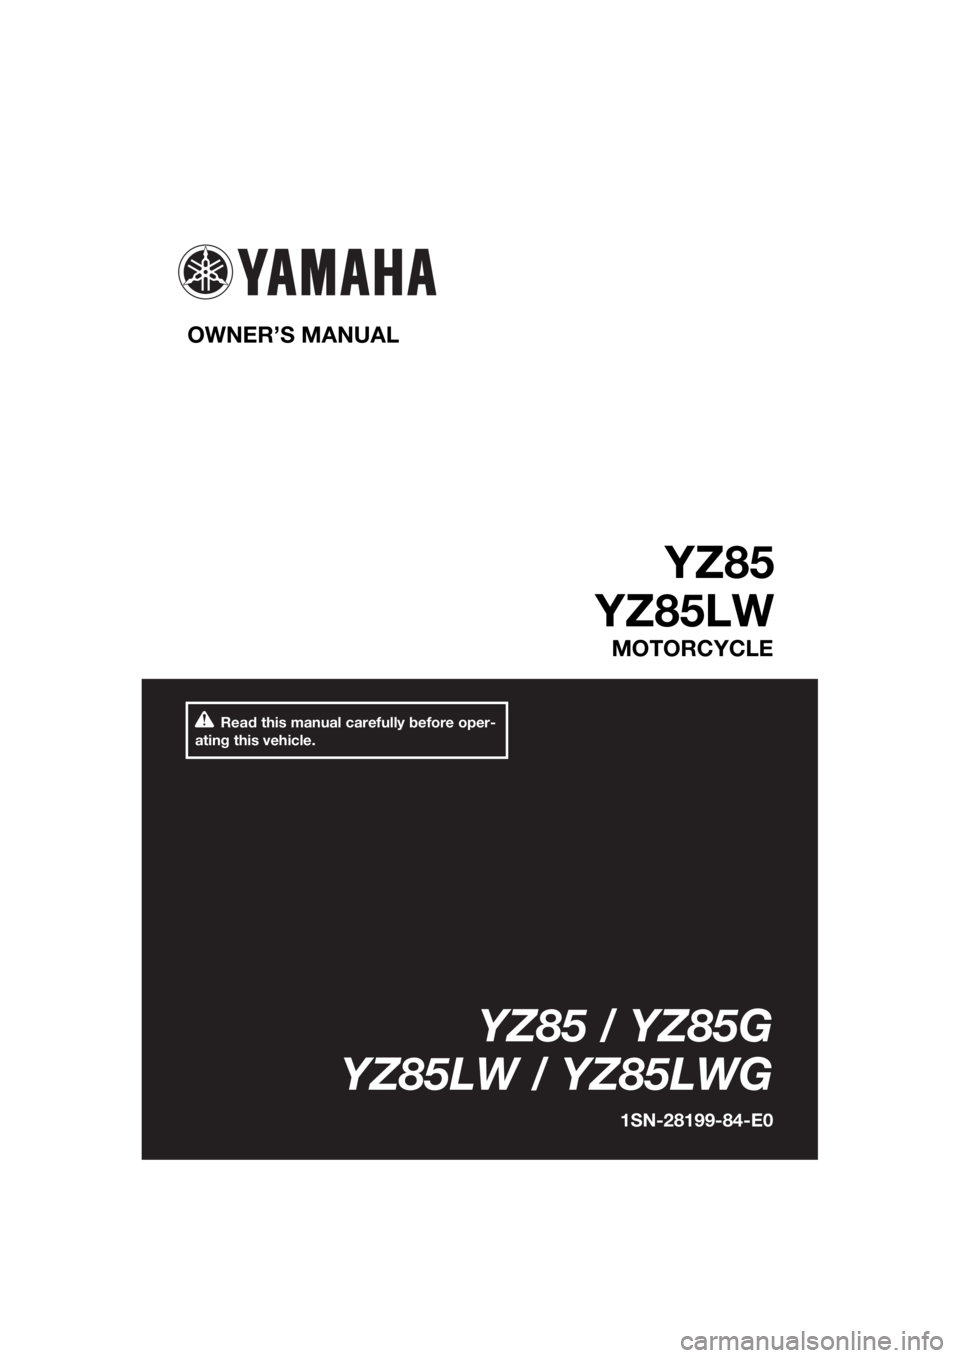 YAMAHA YZ85 2016  Owners Manual Read this manual carefully before oper-
ating this vehicle.
OWNER’S MANUAL 
YZ85
YZ85LW
MOTORCYCLE
YZ85 / YZ85G
YZ85LW / YZ85LWG
1SN-28199-84-E0
U1SN84E0.book  Page 1  Wednesday, June 10, 2015  10:2